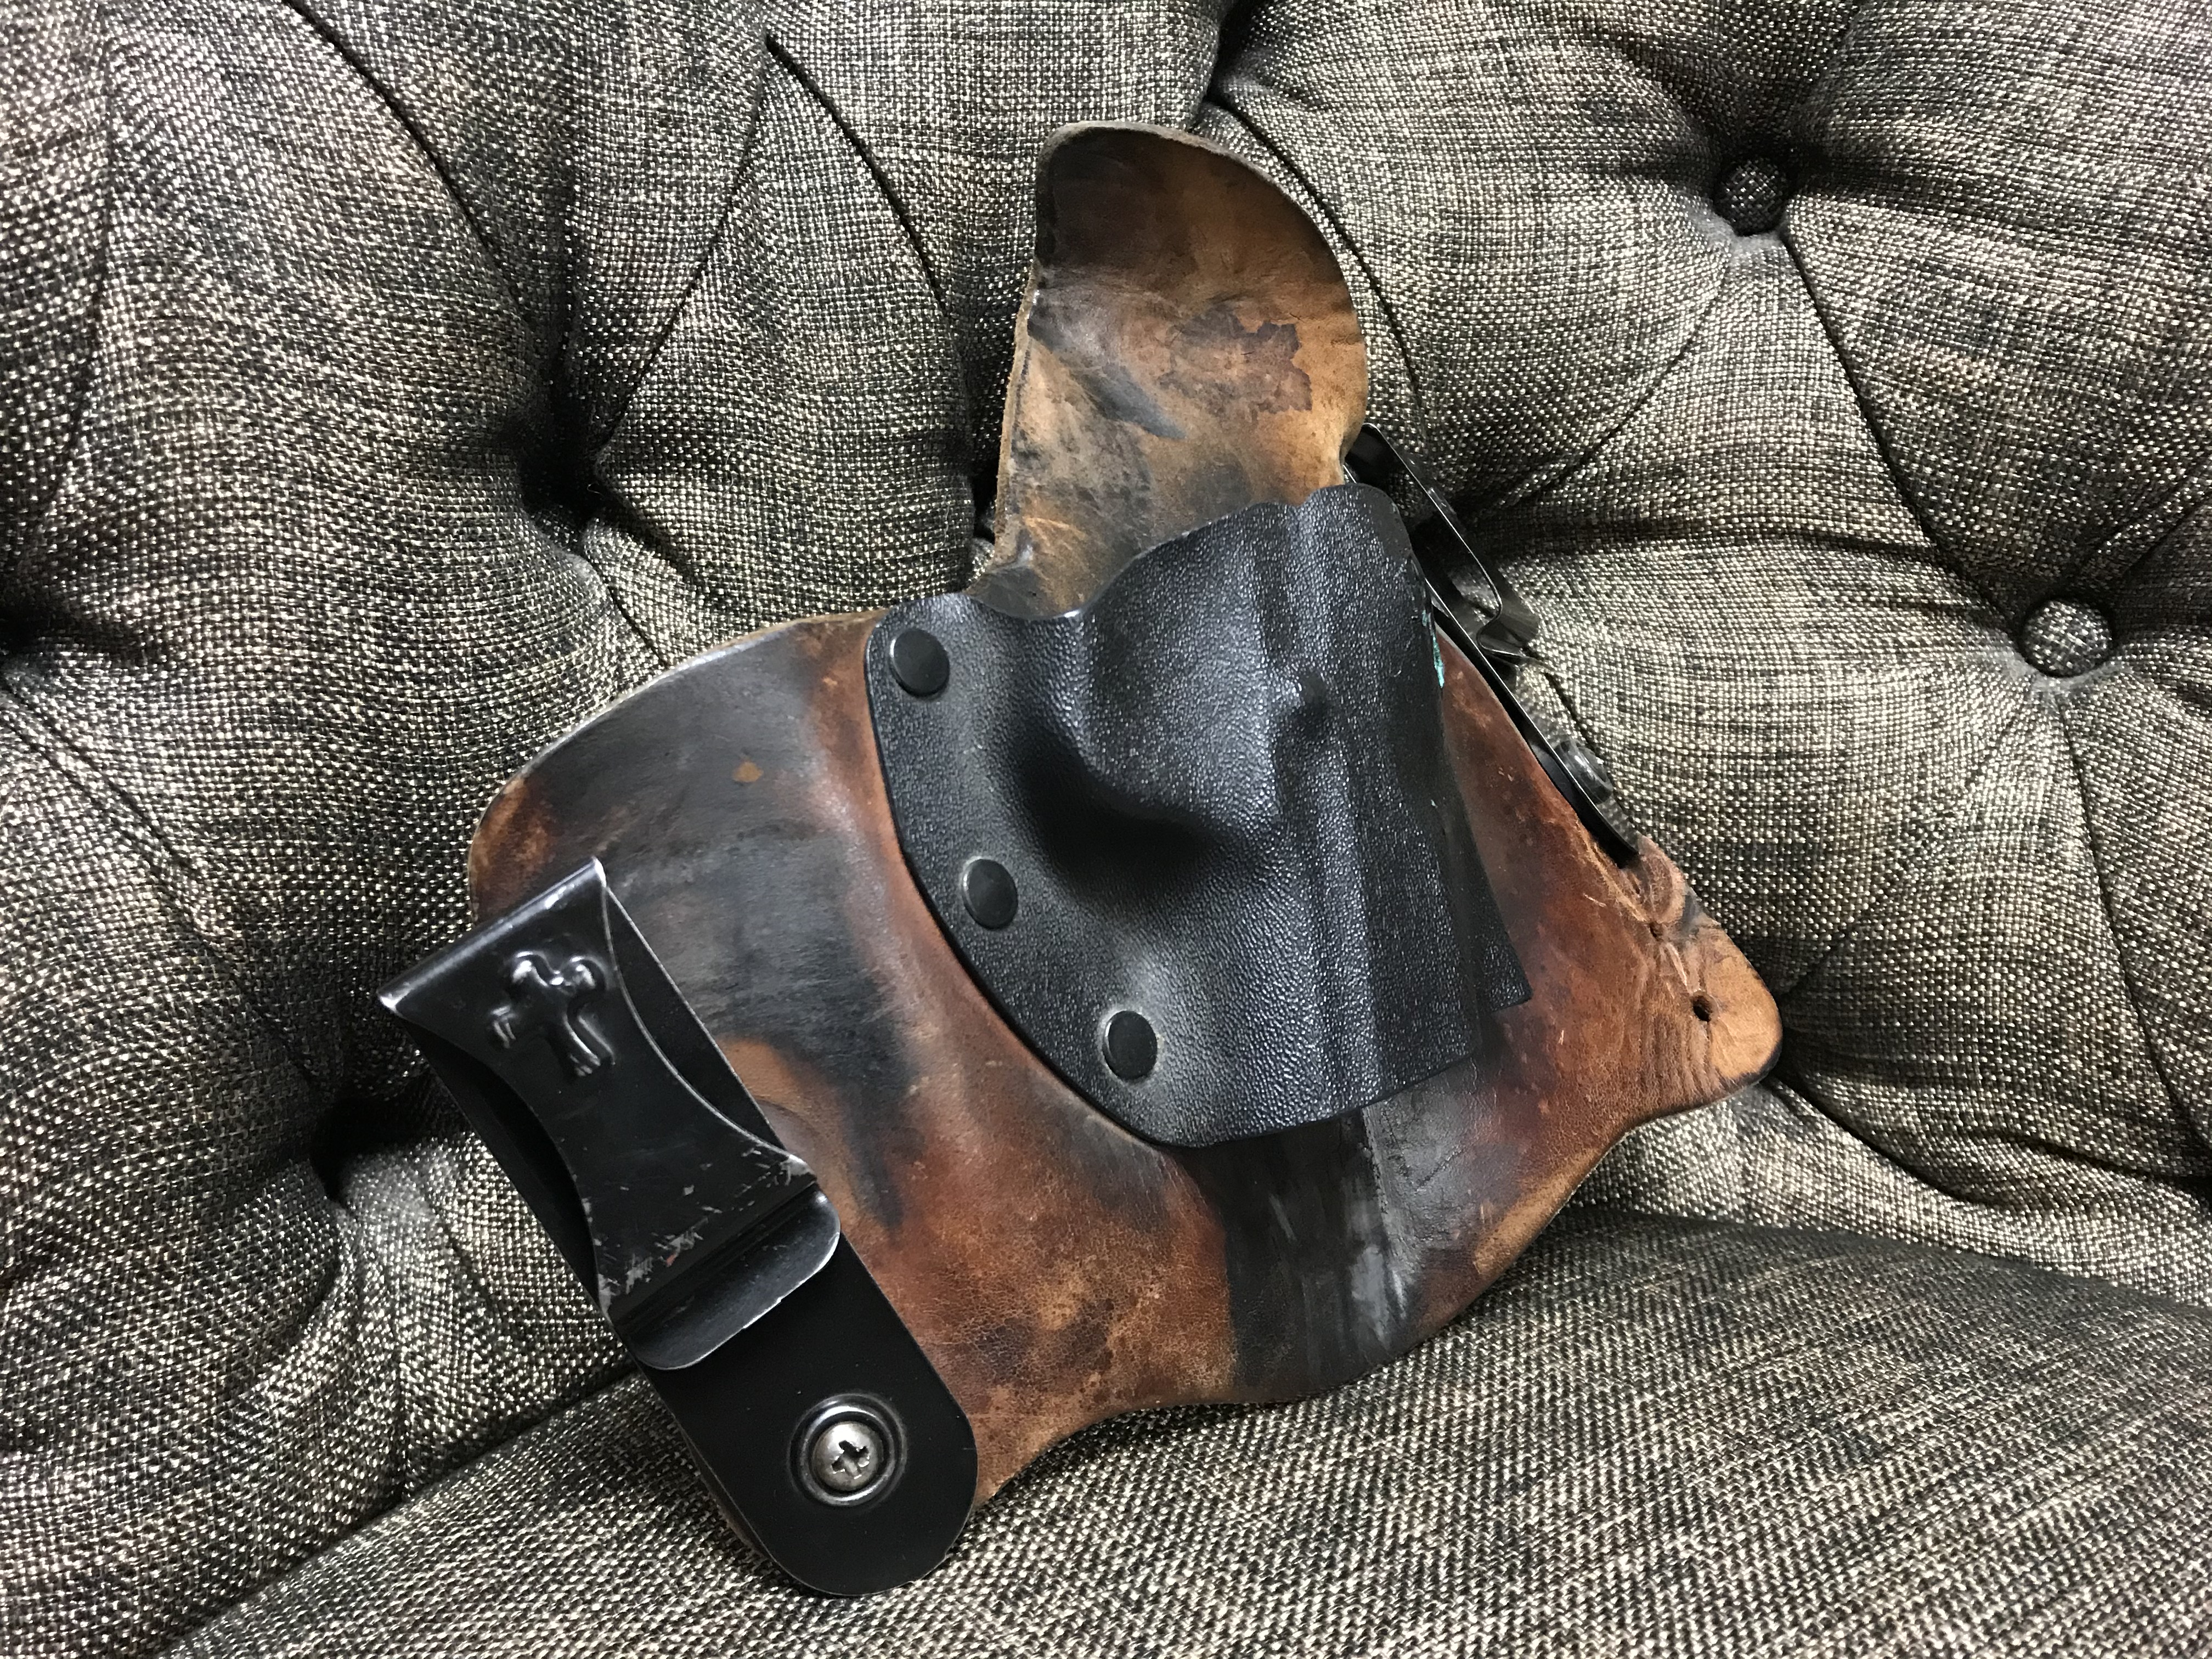 holsters, holster, hybrid holsters, the reckoning holster, IWB, OWB, CrossBreed Holsters, holster maintenance, saddle oil, IWB Holster, clean holster, how to clean your holster, concealed carry, open carry, EDC, everyday carry, 